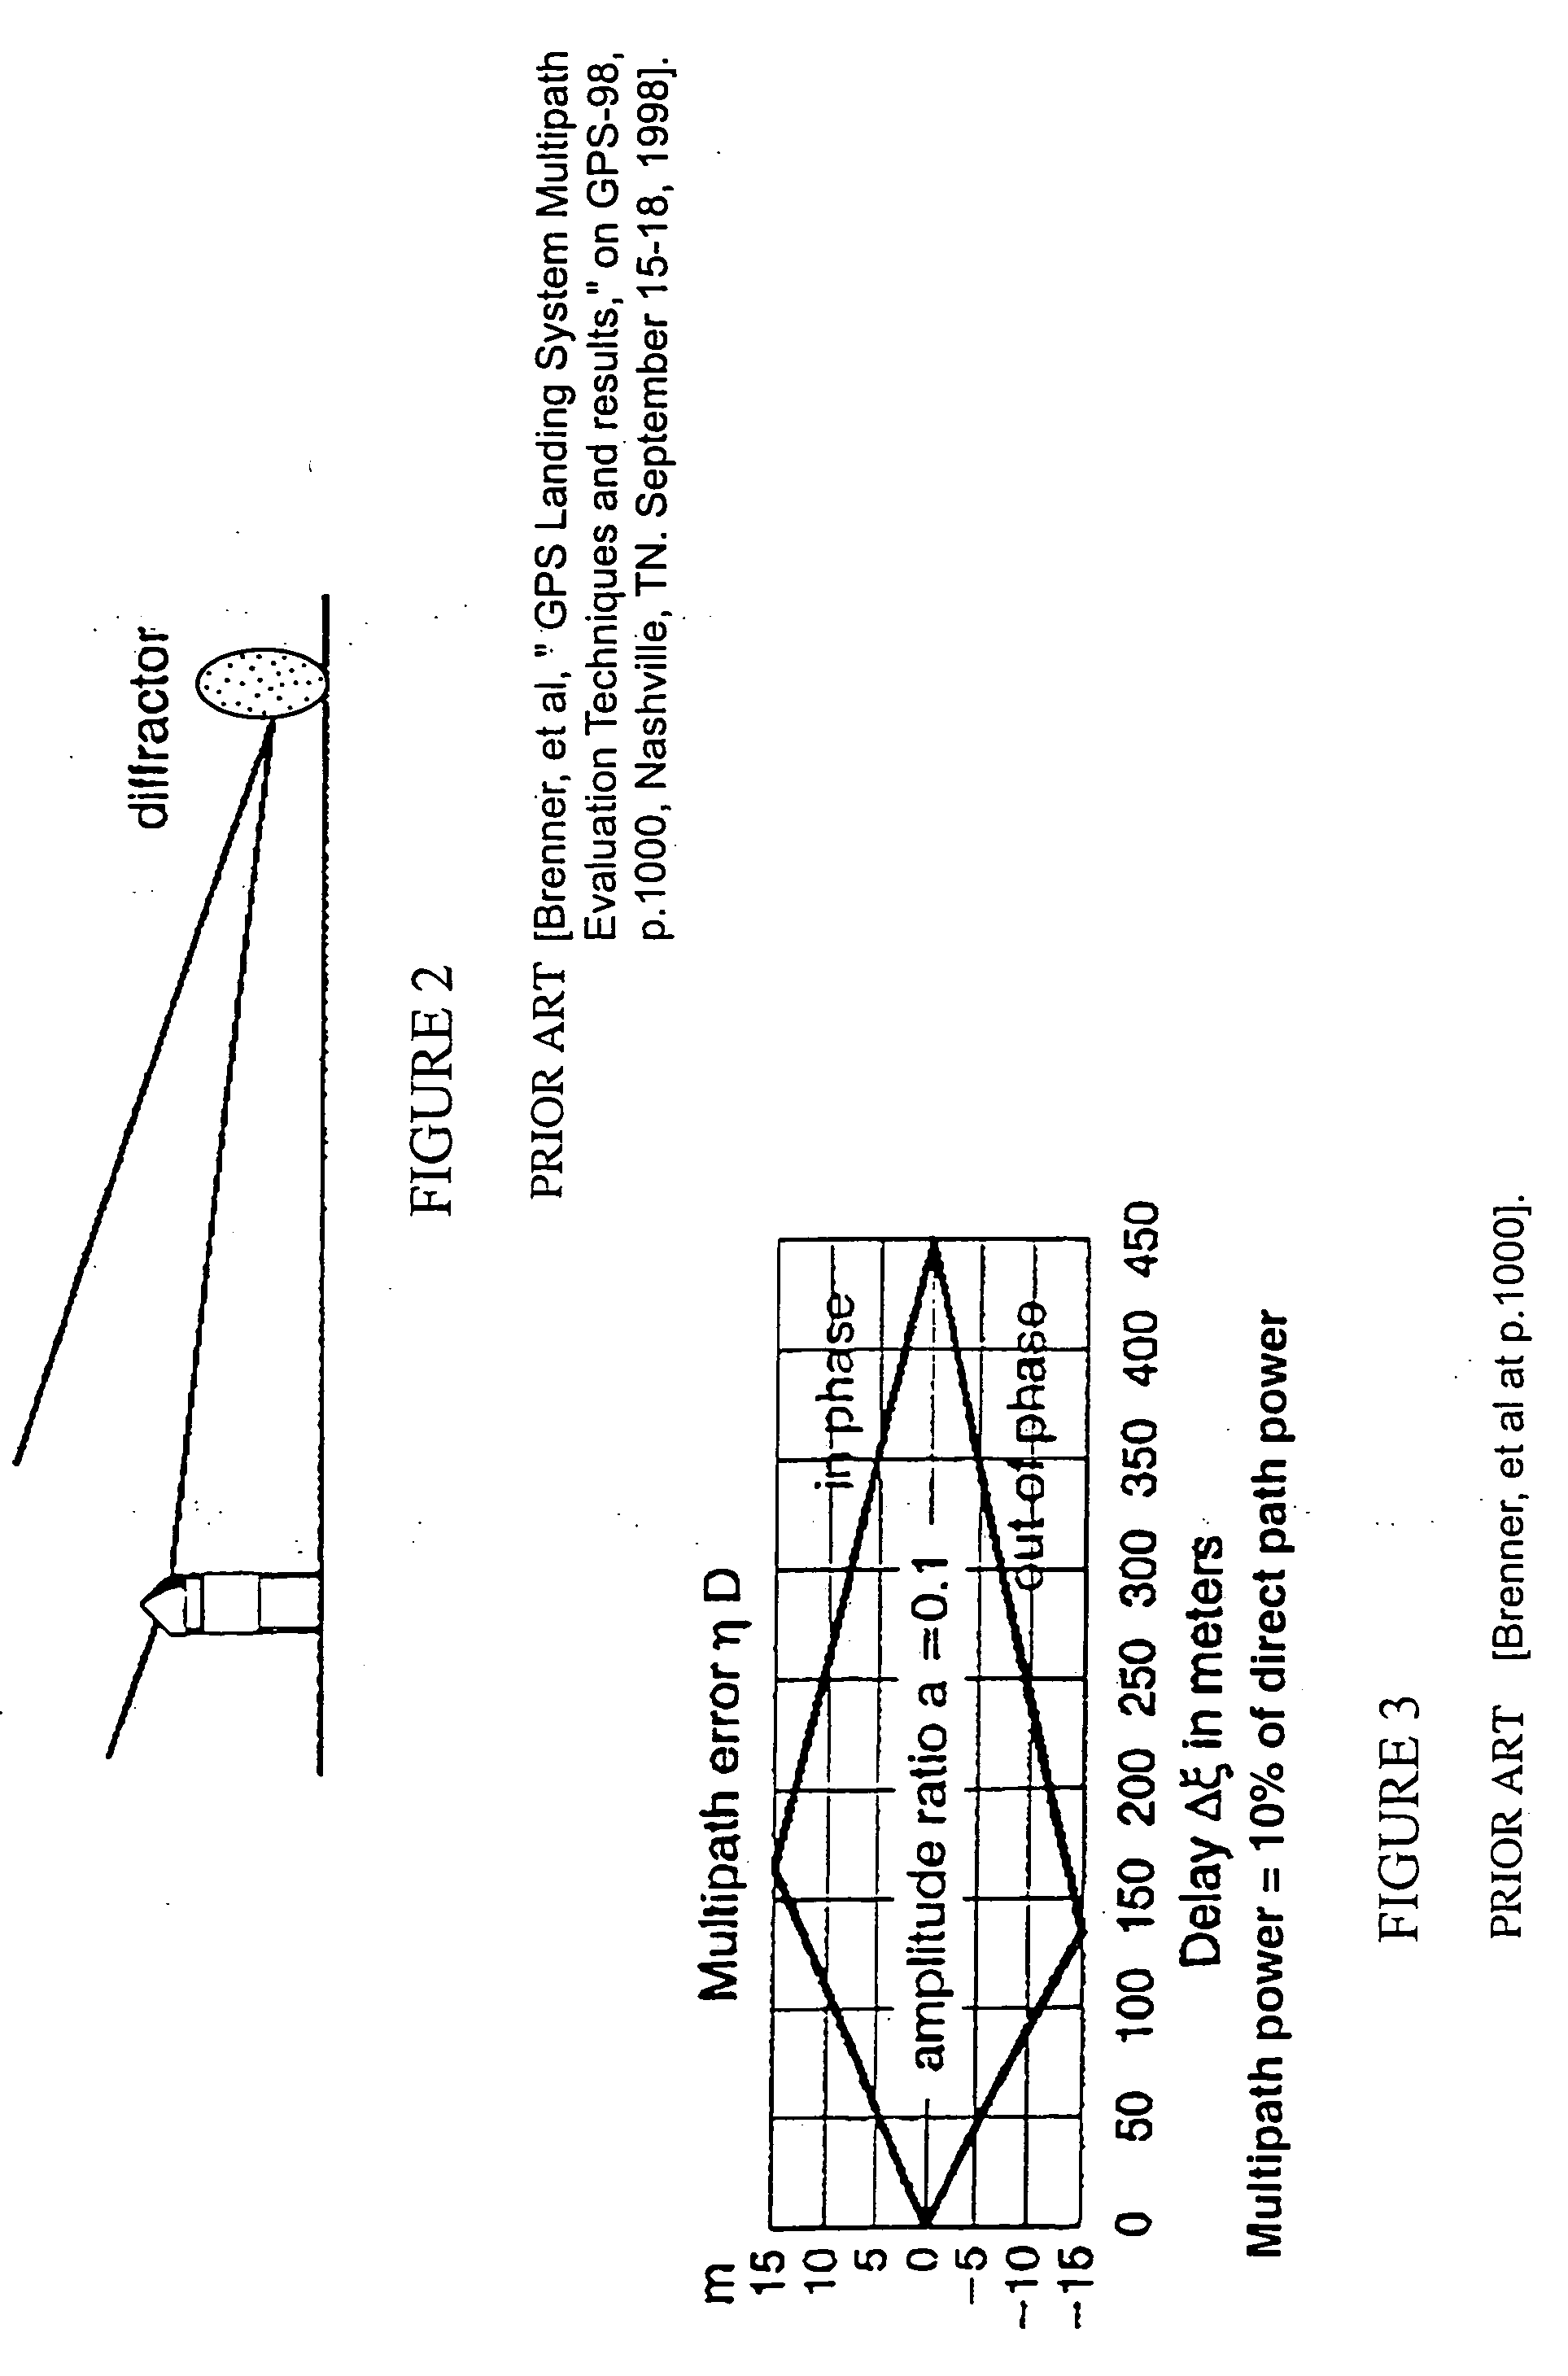 Quadrature multi-frequency ranging (QMFR) applied to GPS multipath mitigation